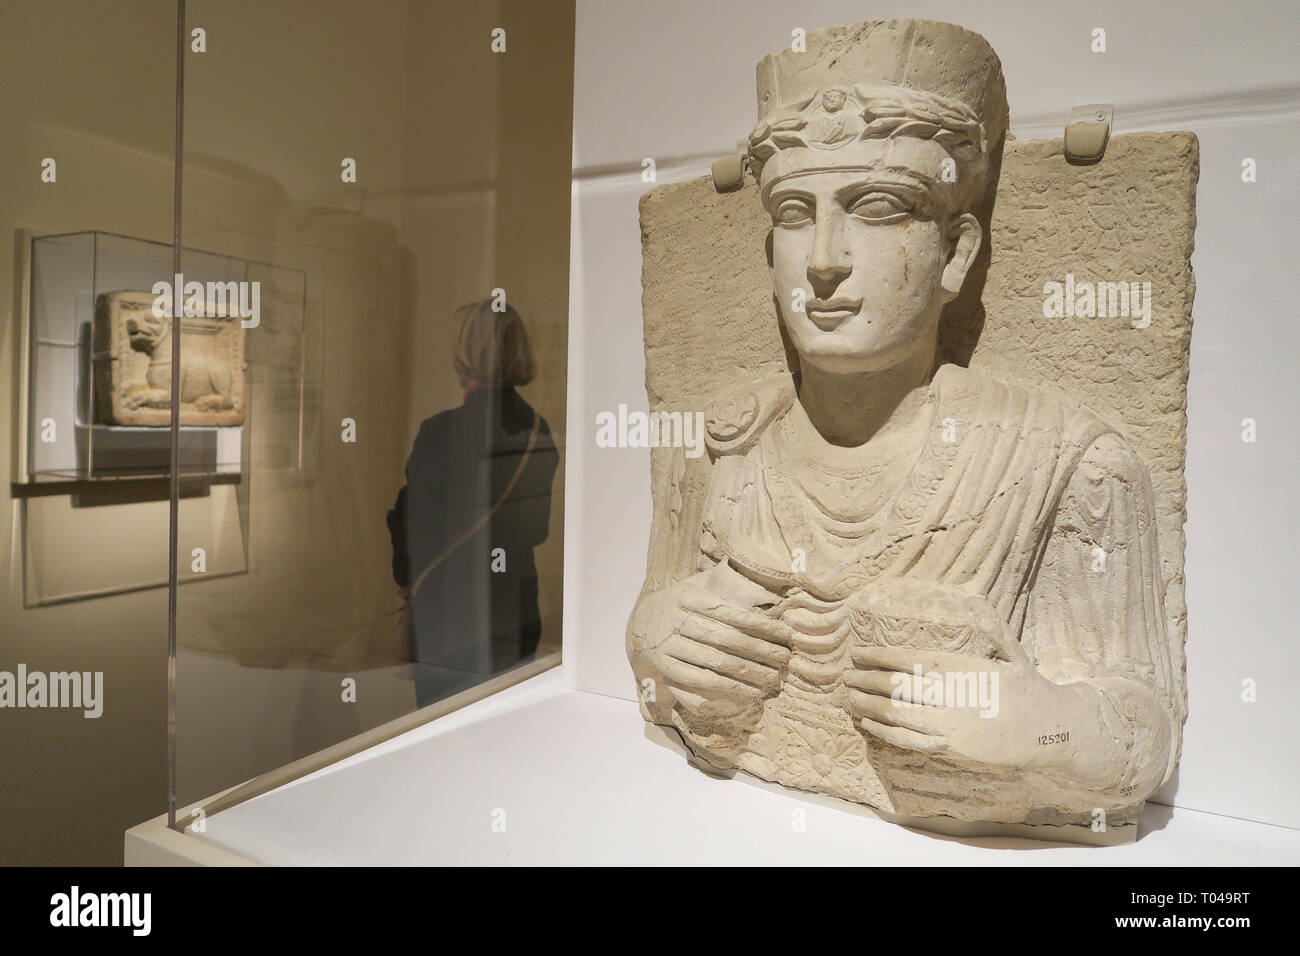 Metropolitan Museum of Art Exhibit of The World between Empires: Art and Identity in the Ancient Middlle East, New York City, USA Stock Photo